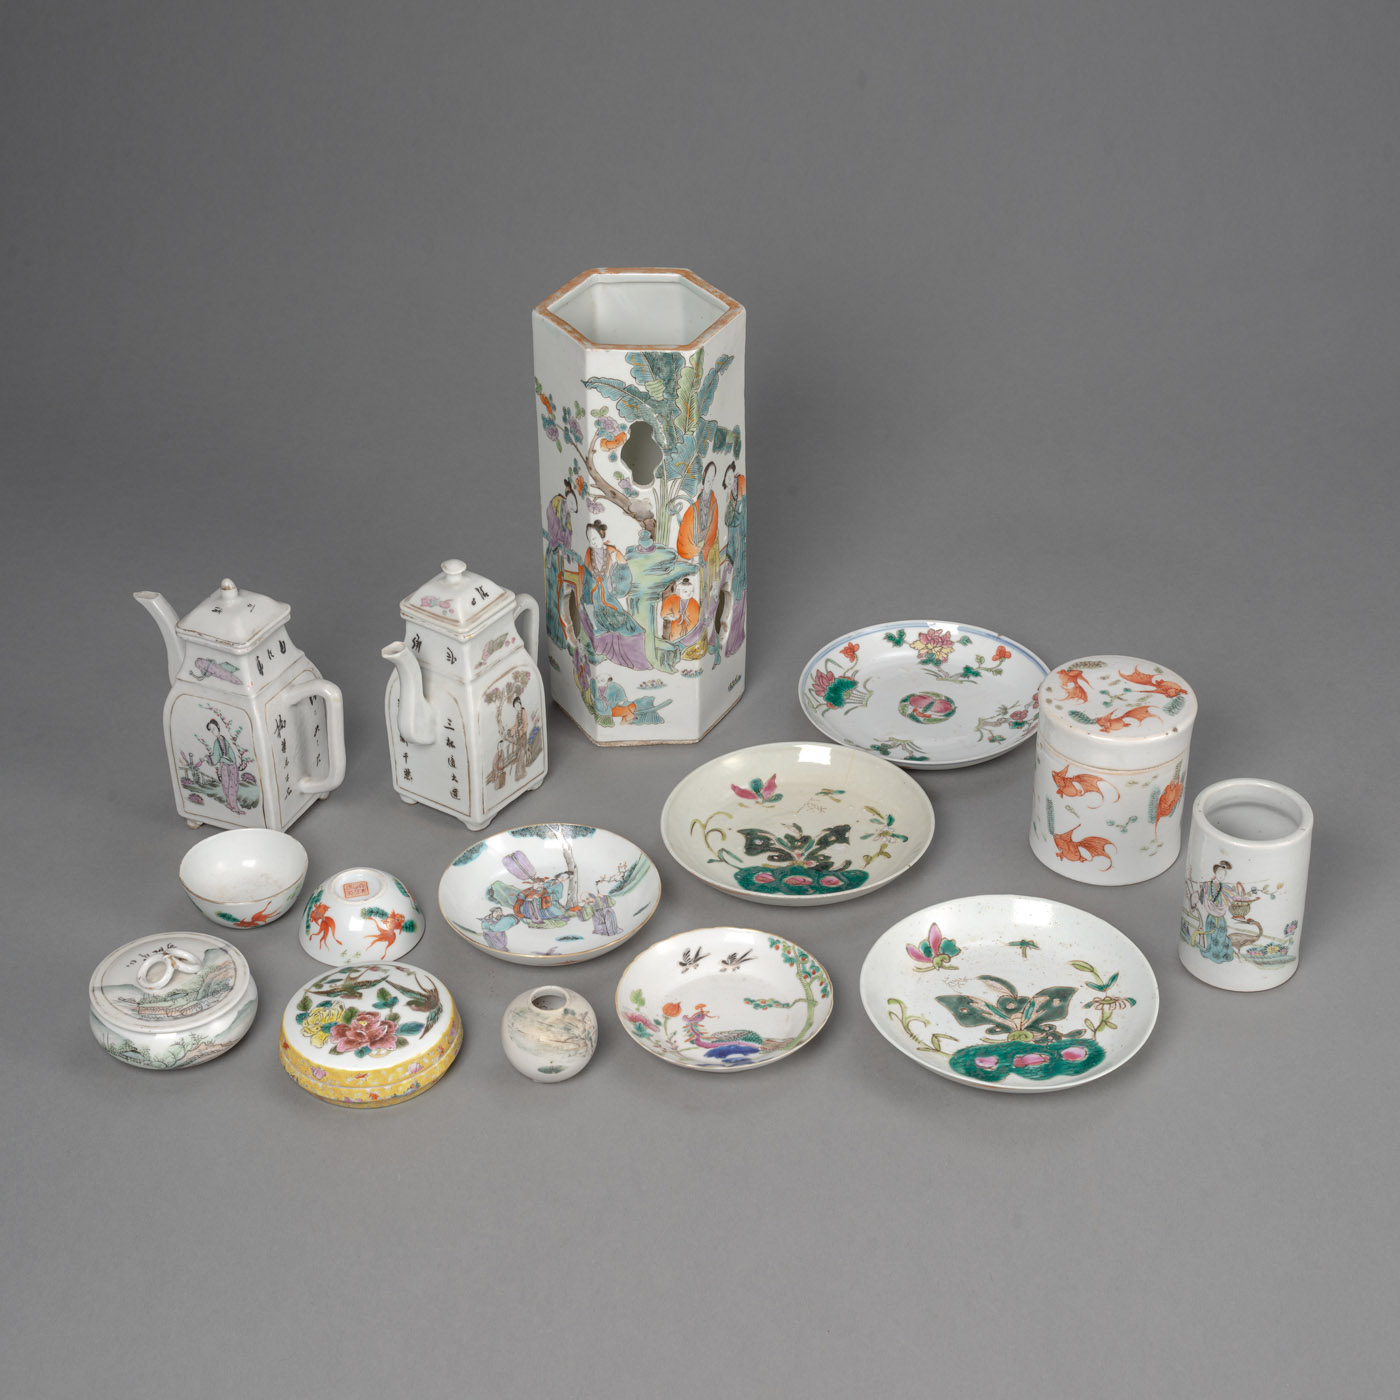 <b>A GROUP OF 'FAMILLE ROSE' PORCELAIN PIECES, E.G. A HATSTAND, TWO TEAPOTS, BOXES AND BOWLS</b>